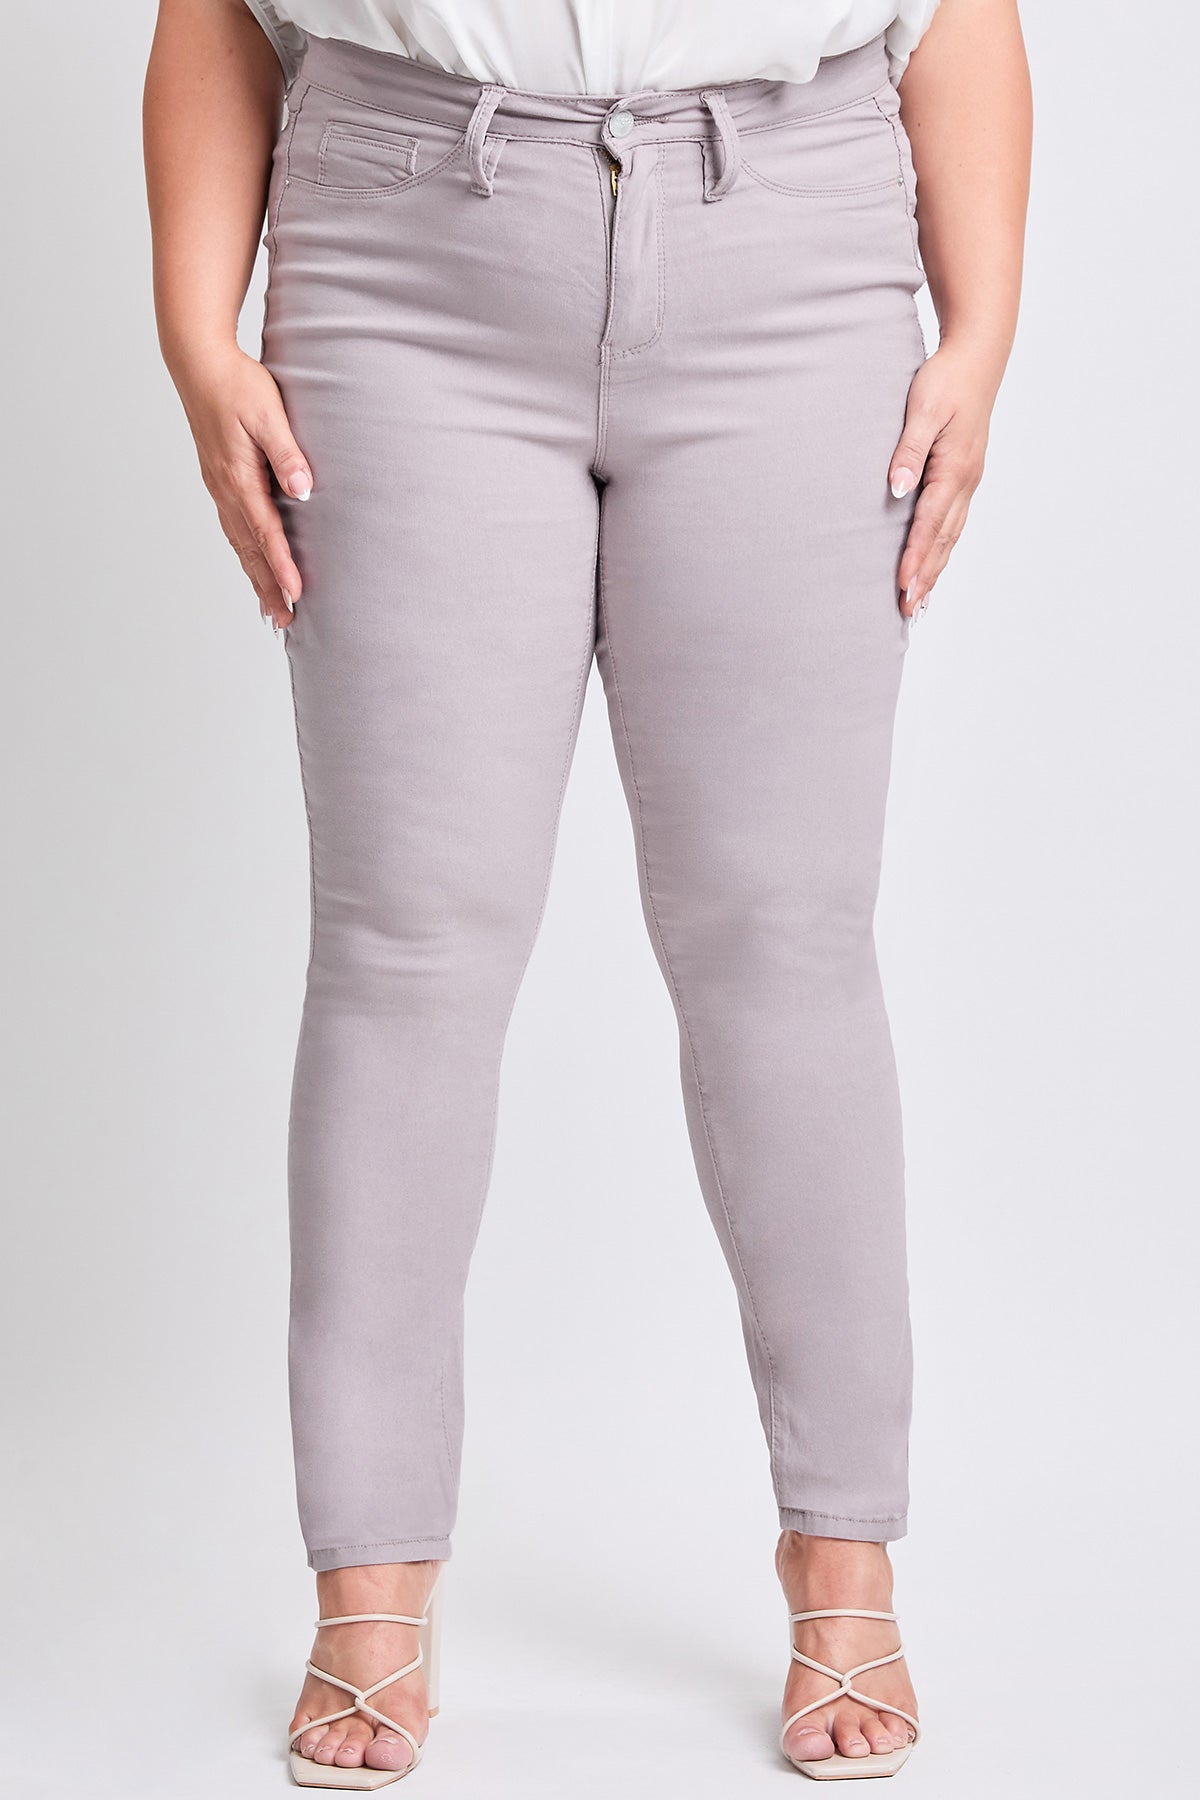 Women's Plus Size Hyperstretch Tummy Control High Rise Skinny Pants